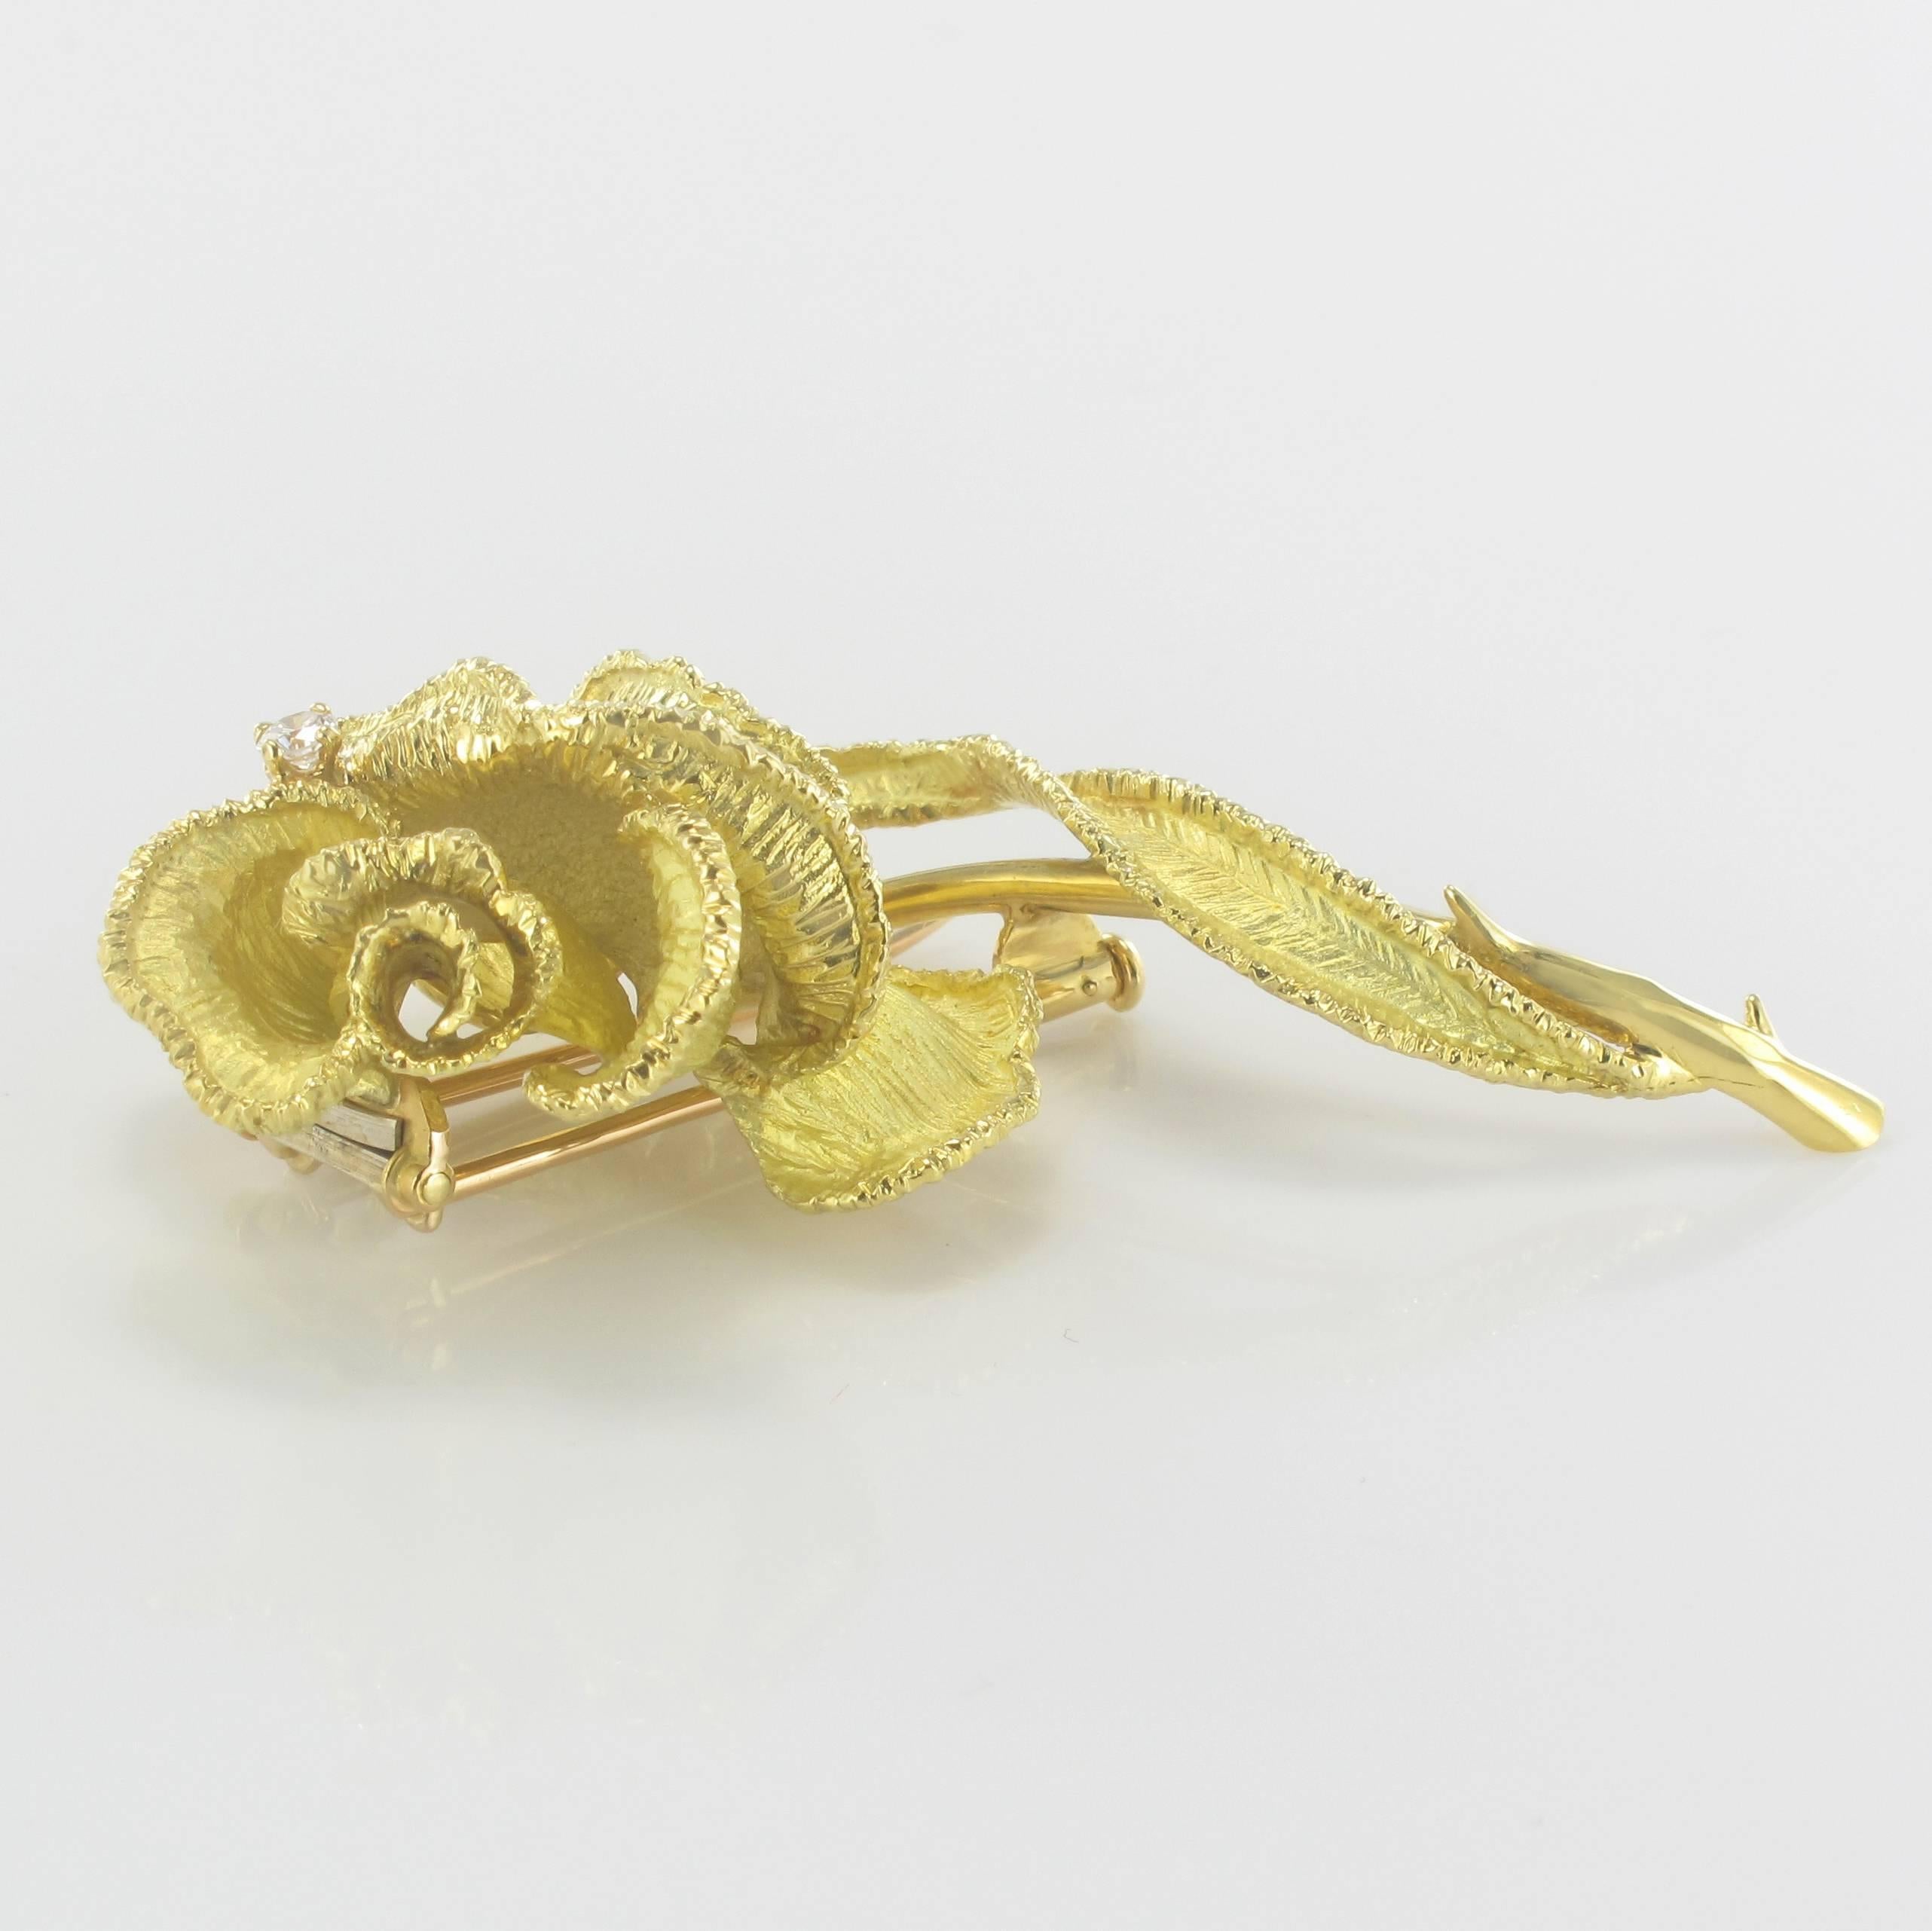 Brooch in 18 carats yellow gold, eagle's head hallmark.
Representing a just hatched rose, this beautiful vintage brooch is set with 4 claws of a brilliant cut diamond on a chiseled decor. The clasp is made by a double pin with safety pump.
Total